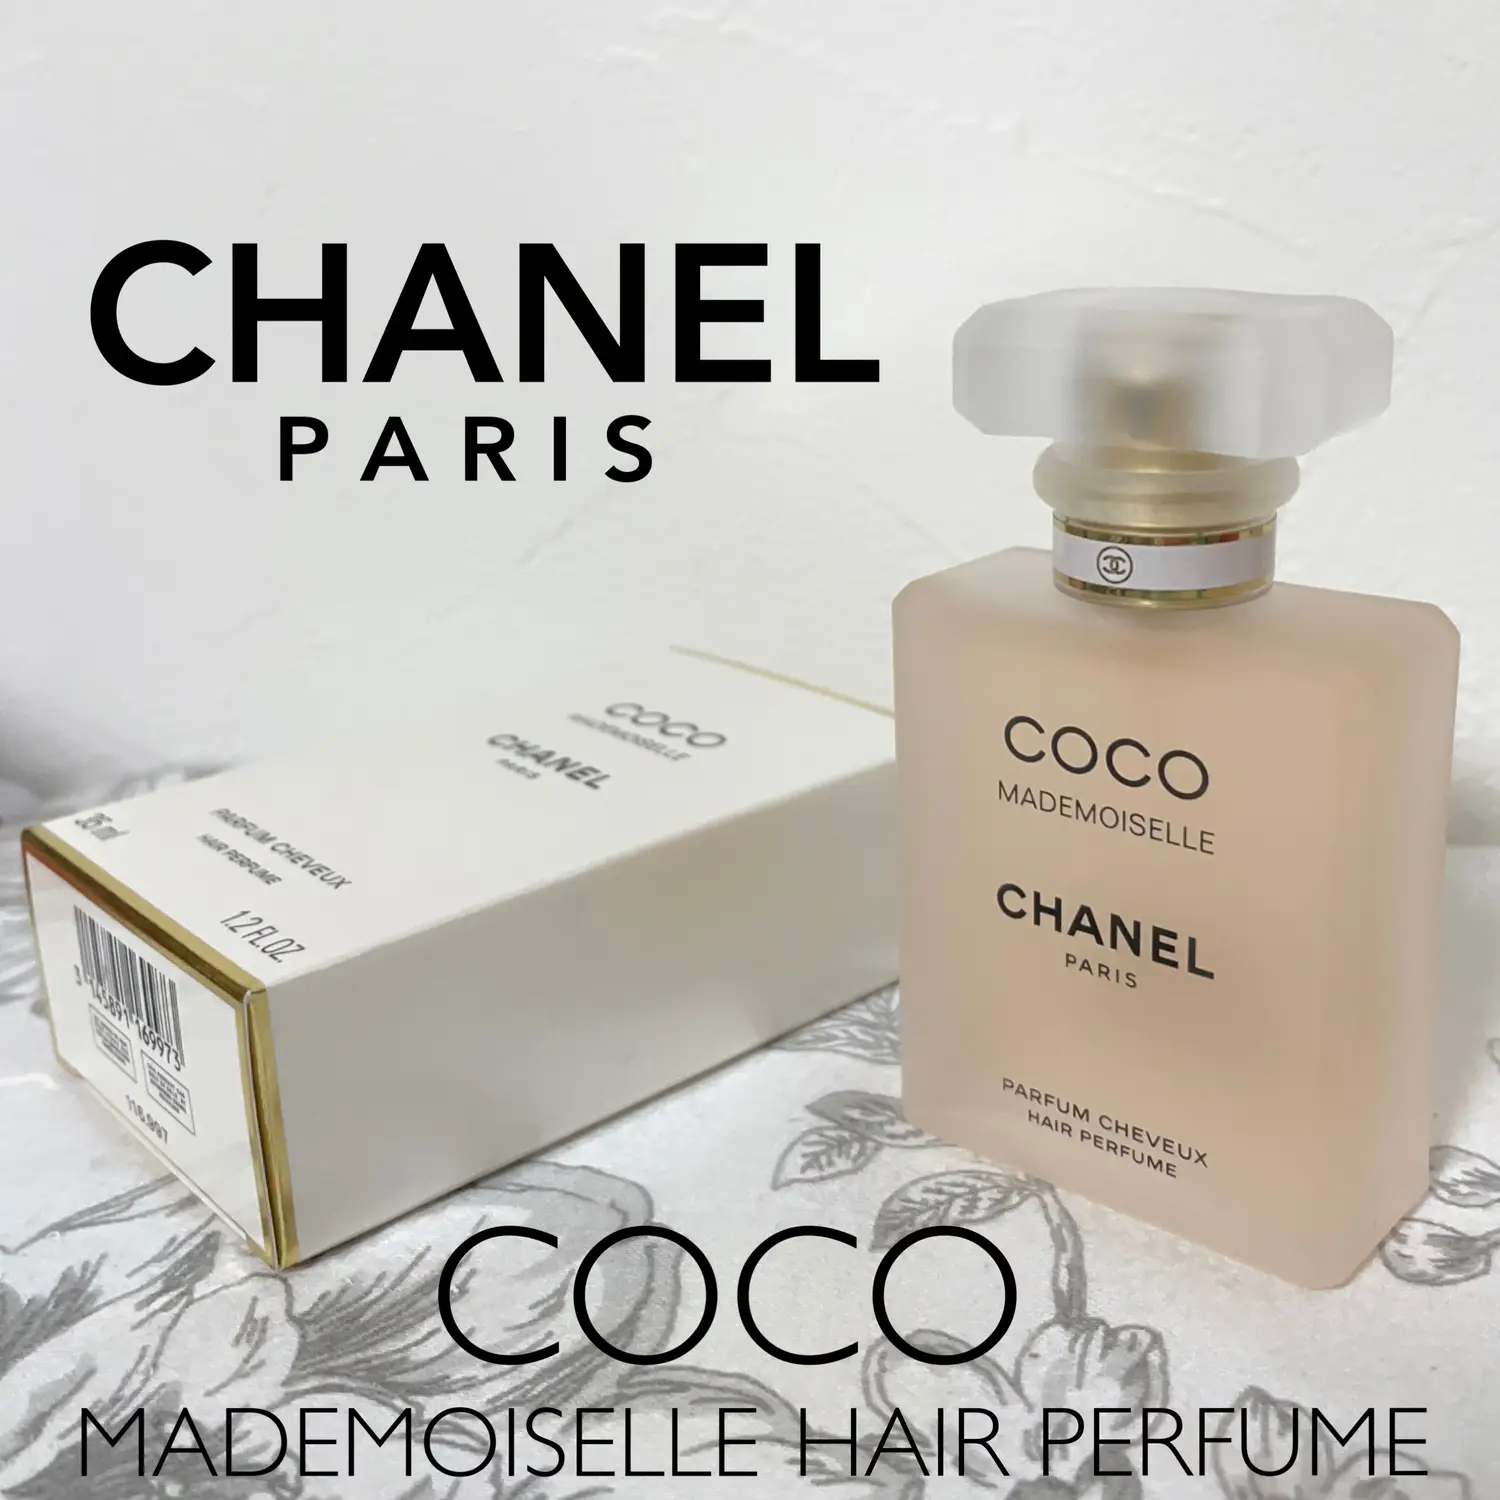 CHANEL 🫧 Hair Parfum, Gallery posted by moichanmoi